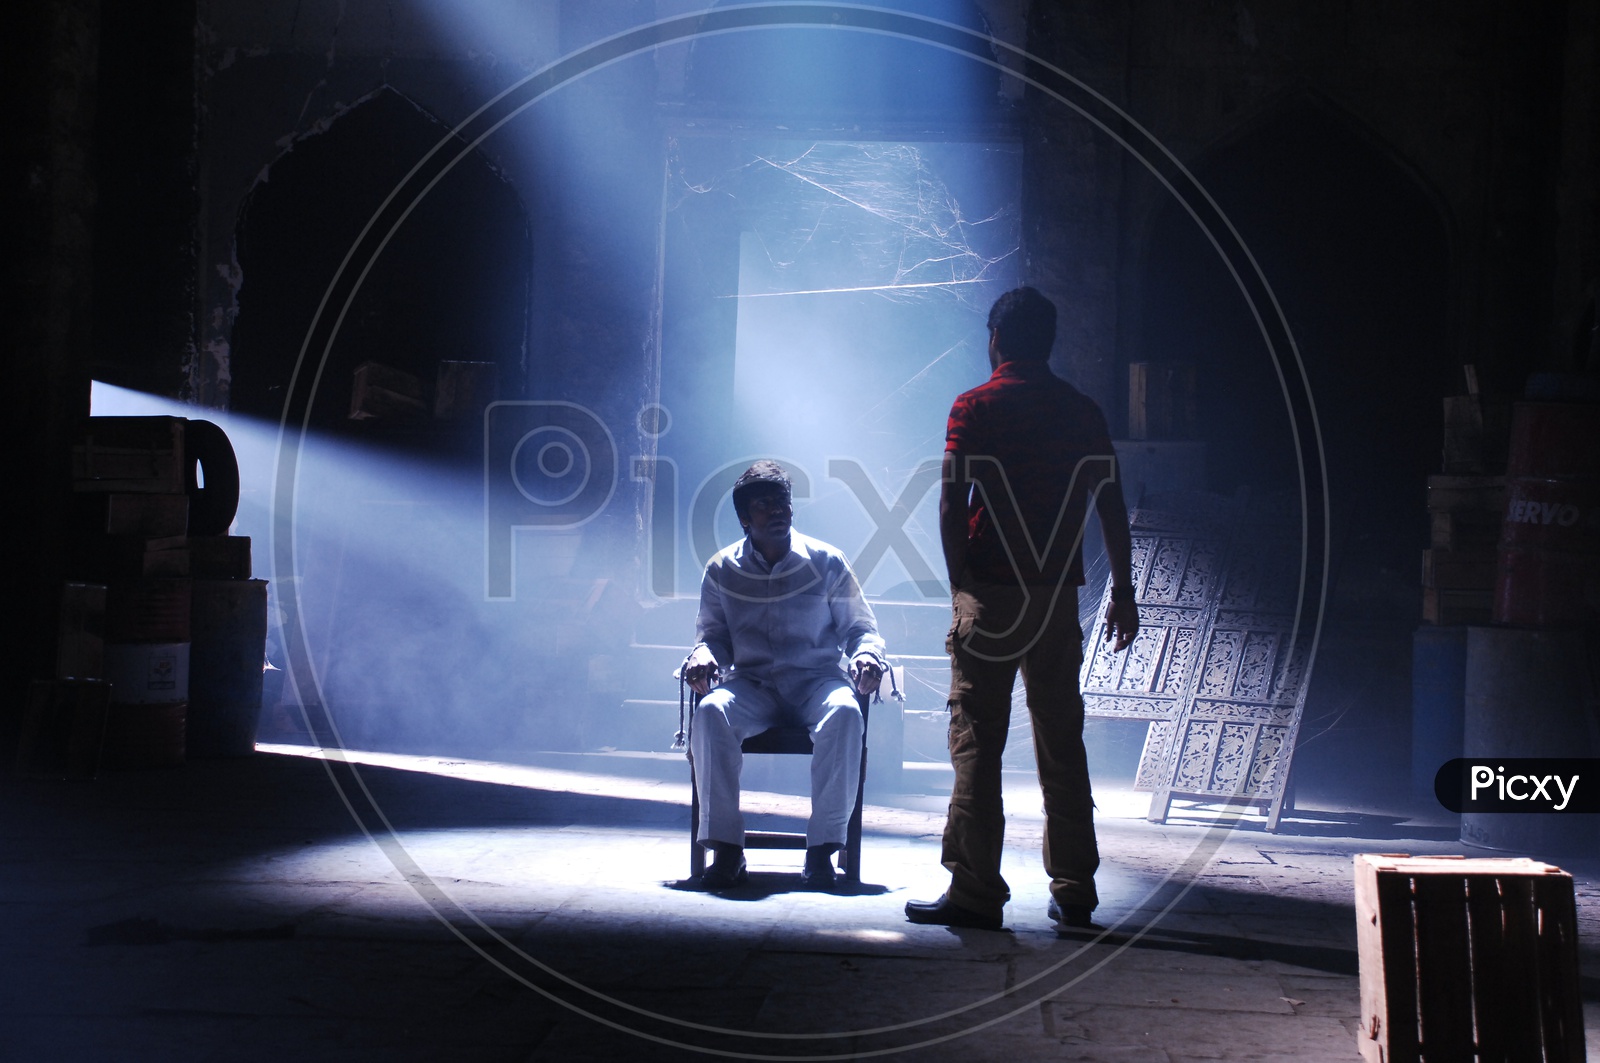 An Unidentified Person Tied to Chair, Telugu Movie Shooting Scenes